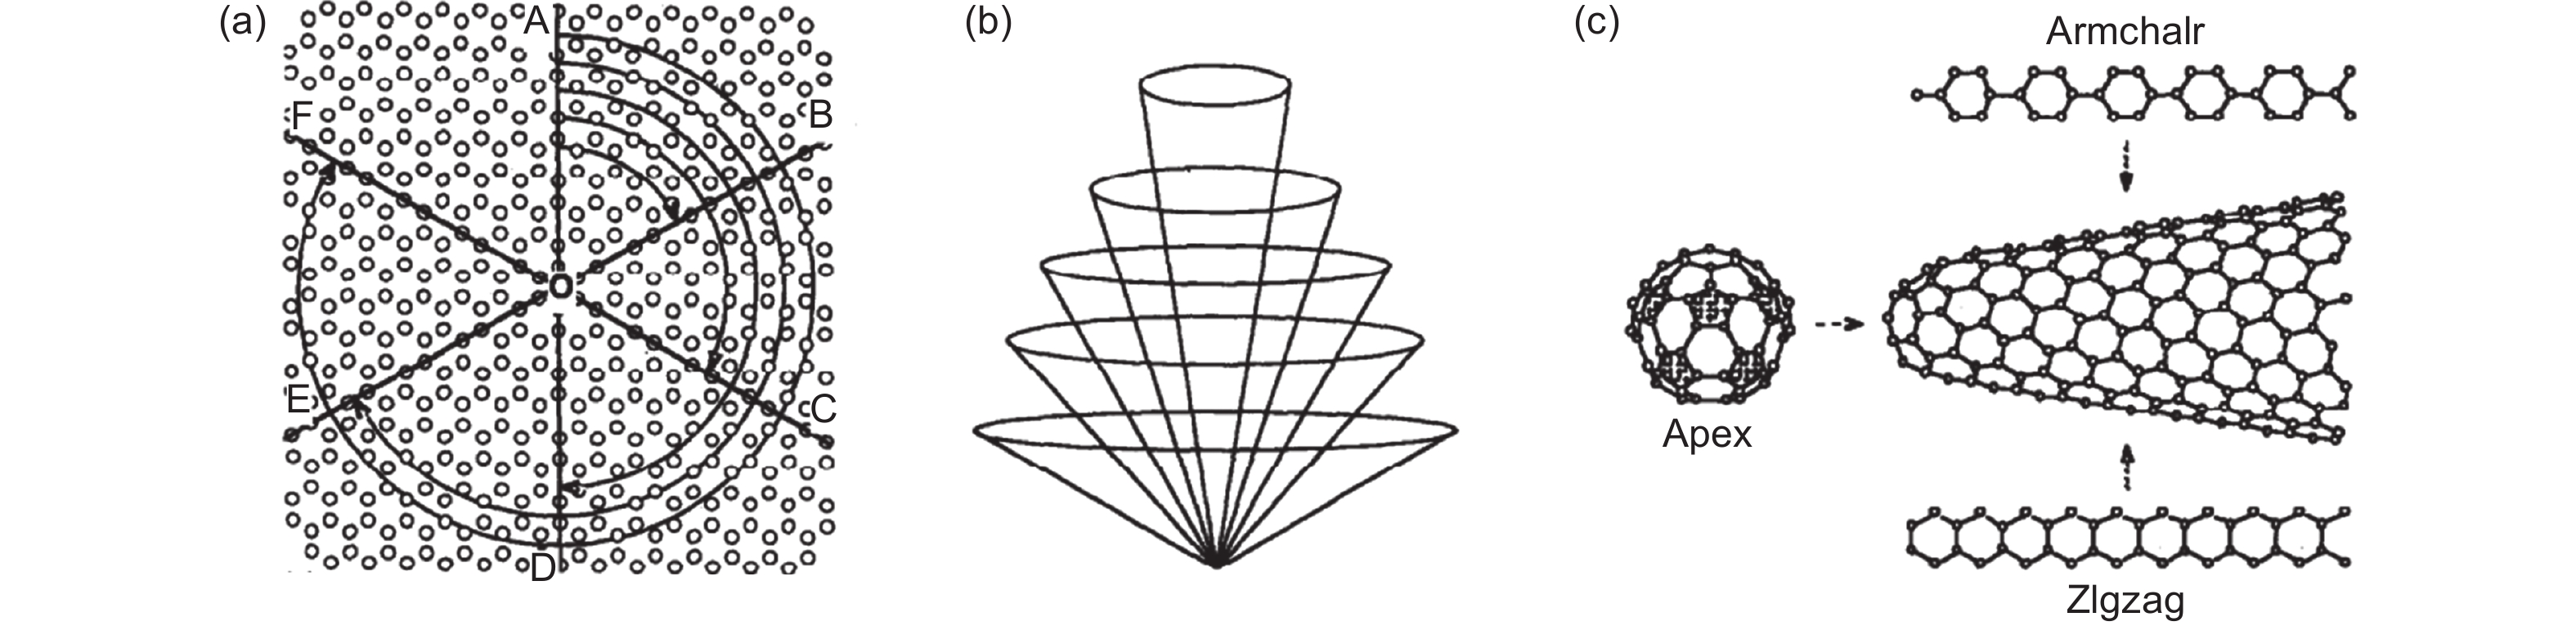 A review of fibrous graphite materials: graphite whiskers, columnar carbons  with a cone-shaped top, and needle- and rods-like polyhedral crystals